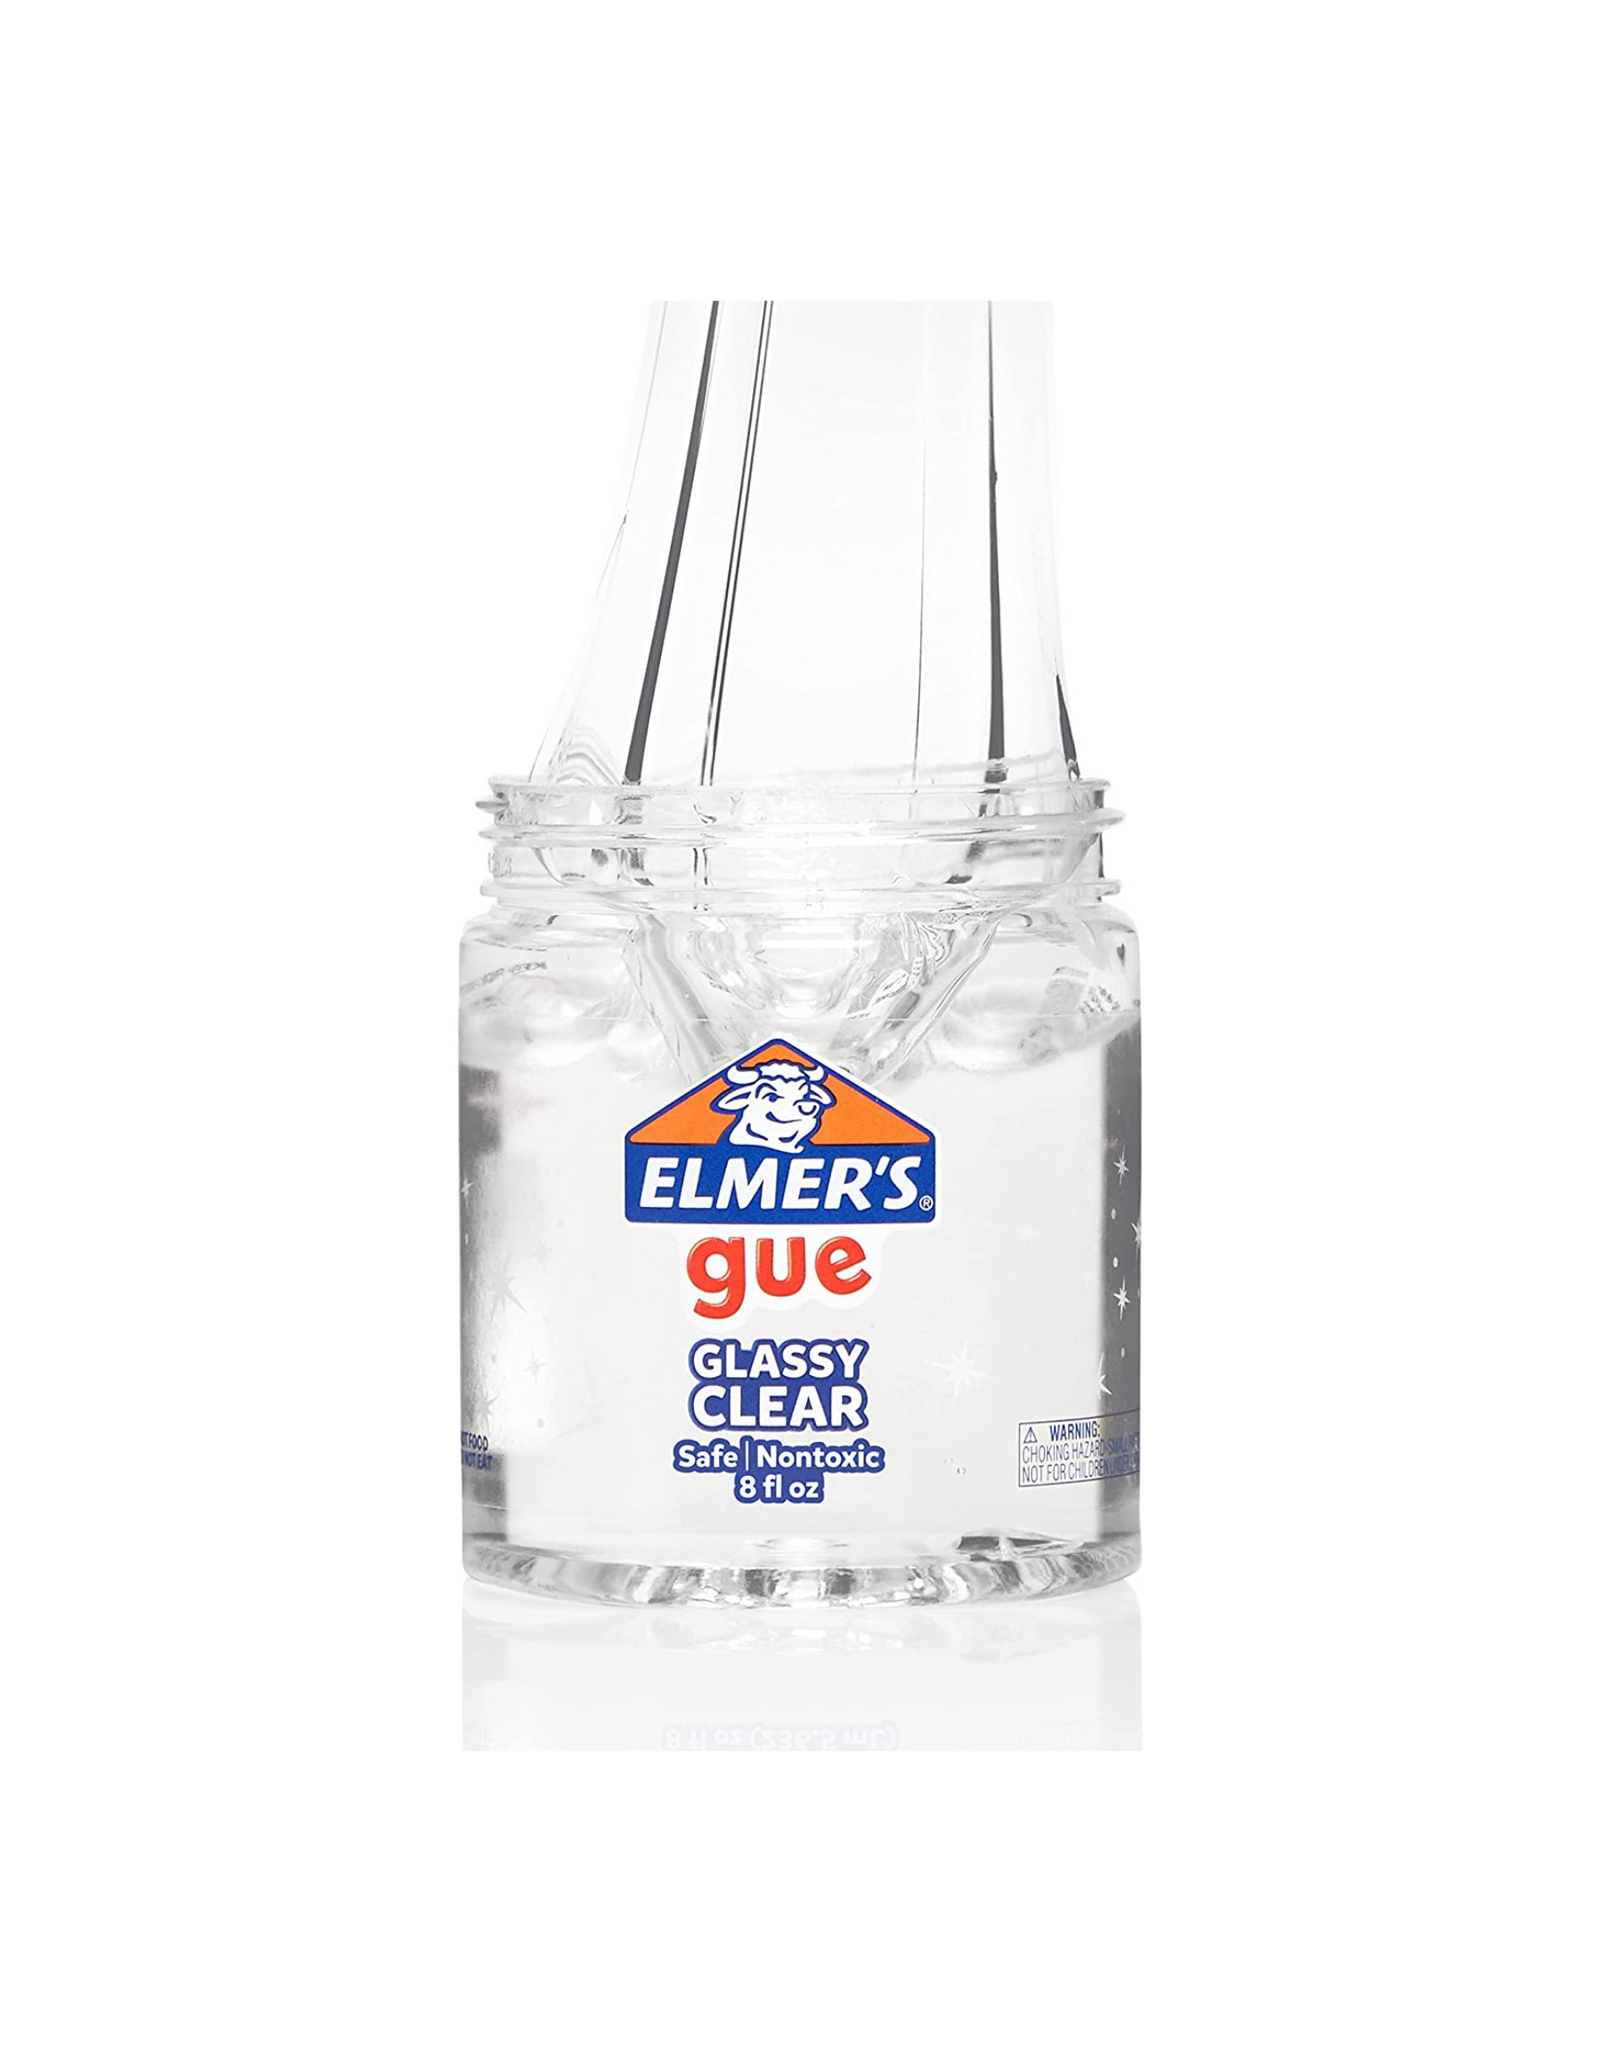 Elmer's Glue Pre Made Slime, Glassy Clear Slime, Great for Mixing in Add-ins, Safe & Nontoxic 8 fl oz, 2 Ct